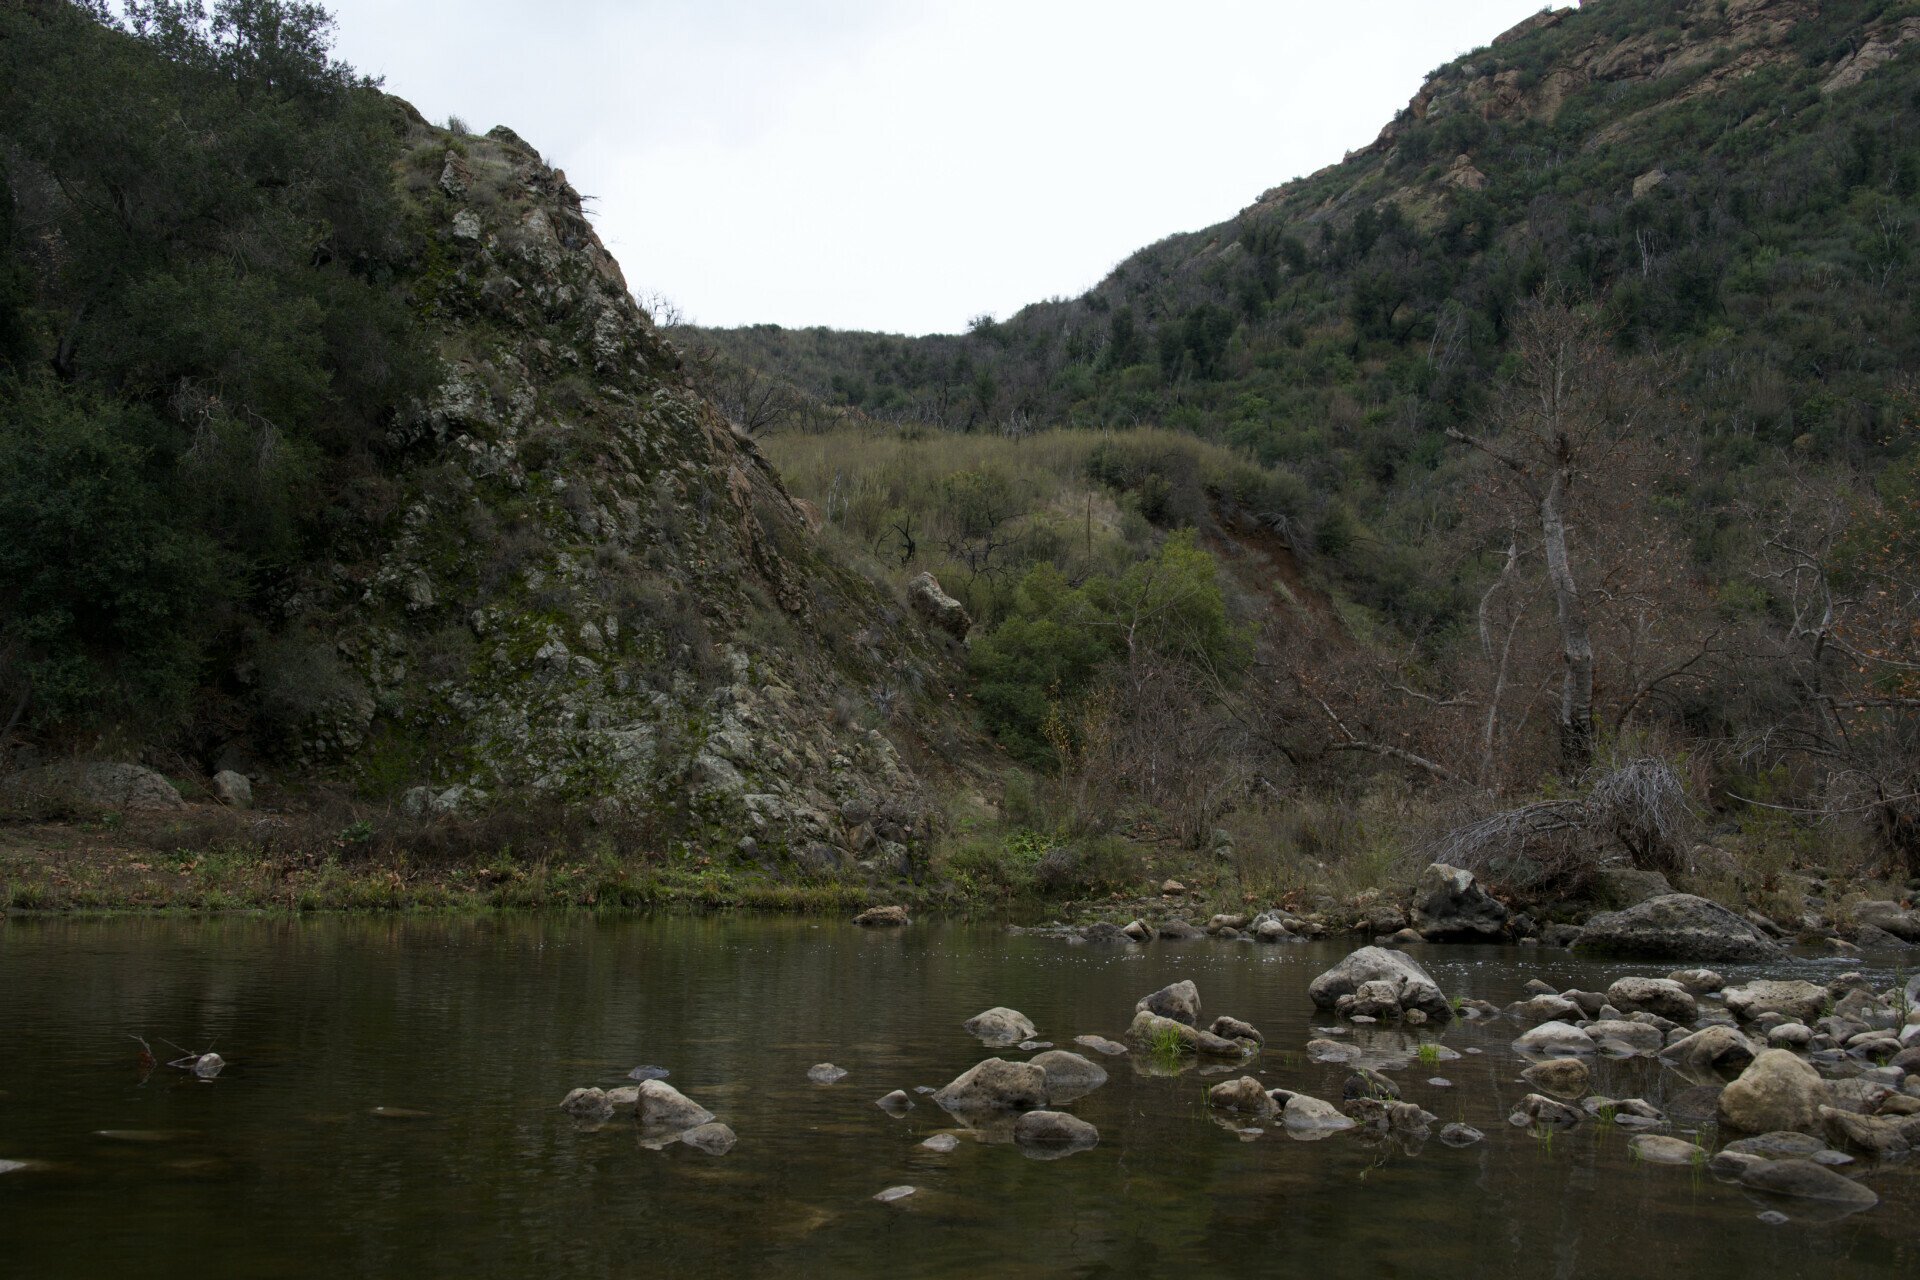 A tranquil scene at Malibu Creek State Park featuring smooth rocks and clear waters surrounded by lush vegetation.